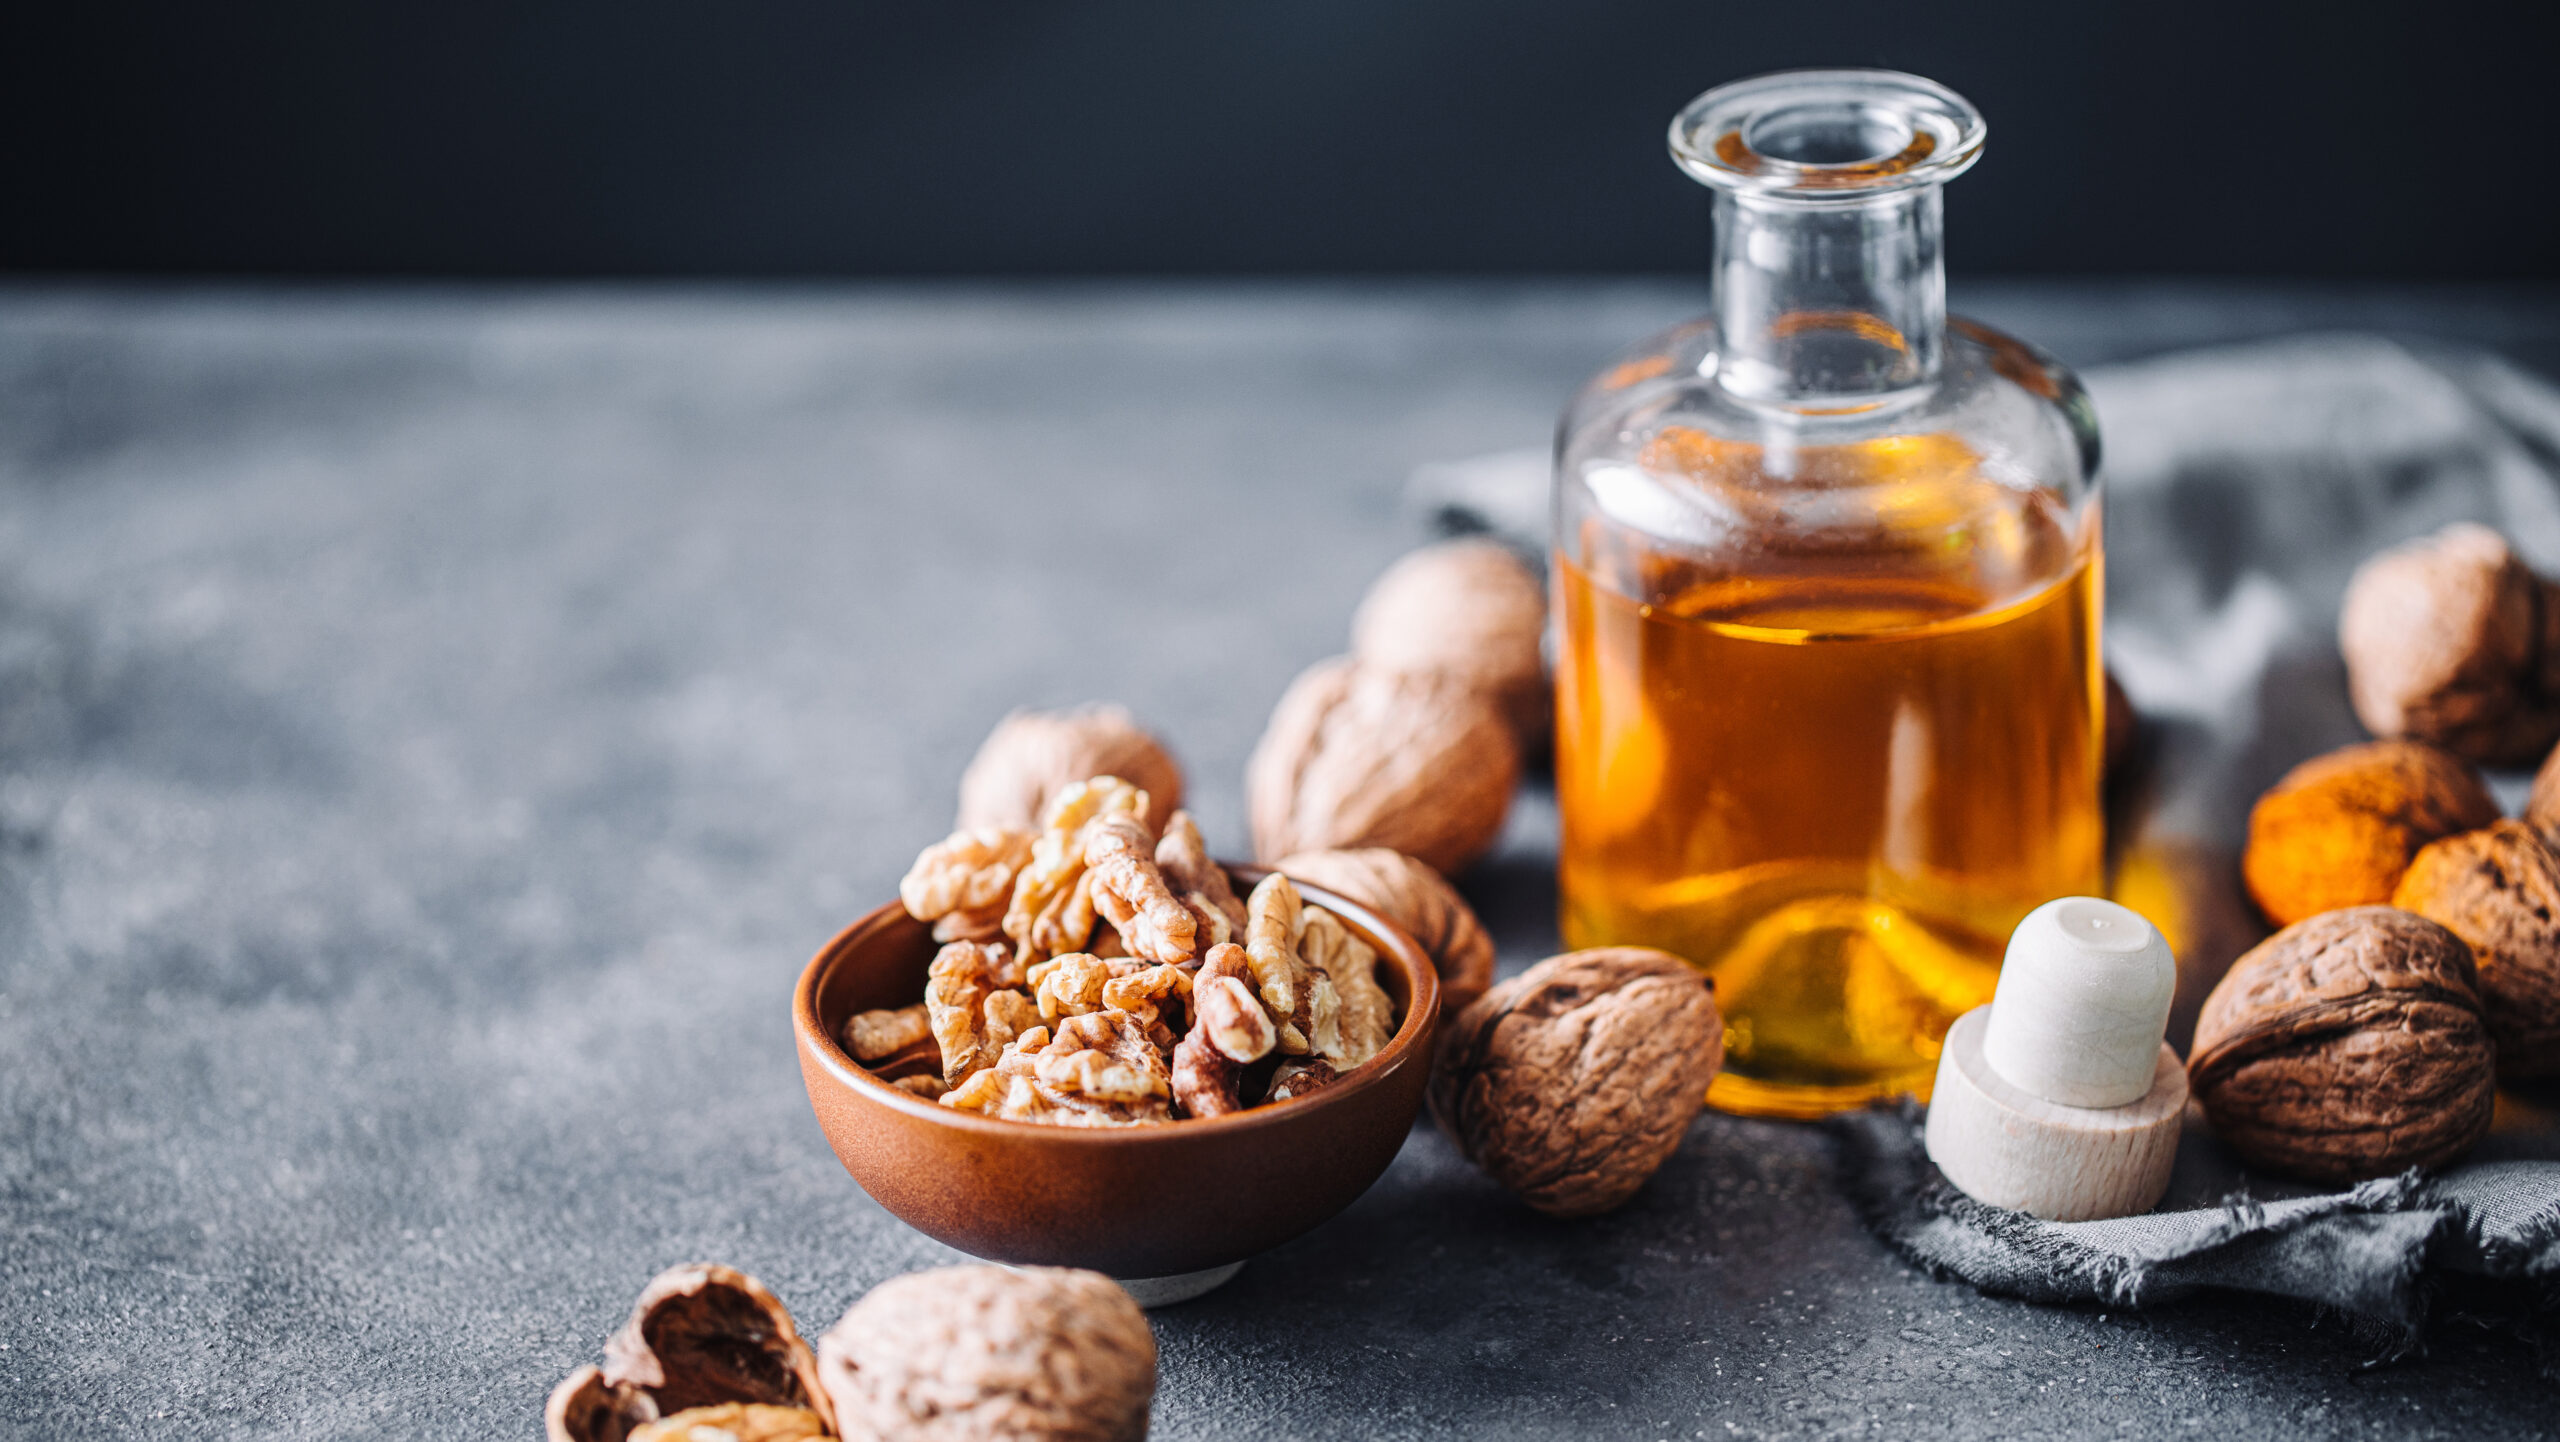 Bowl of walnuts and flax seed oil in glass bottle s